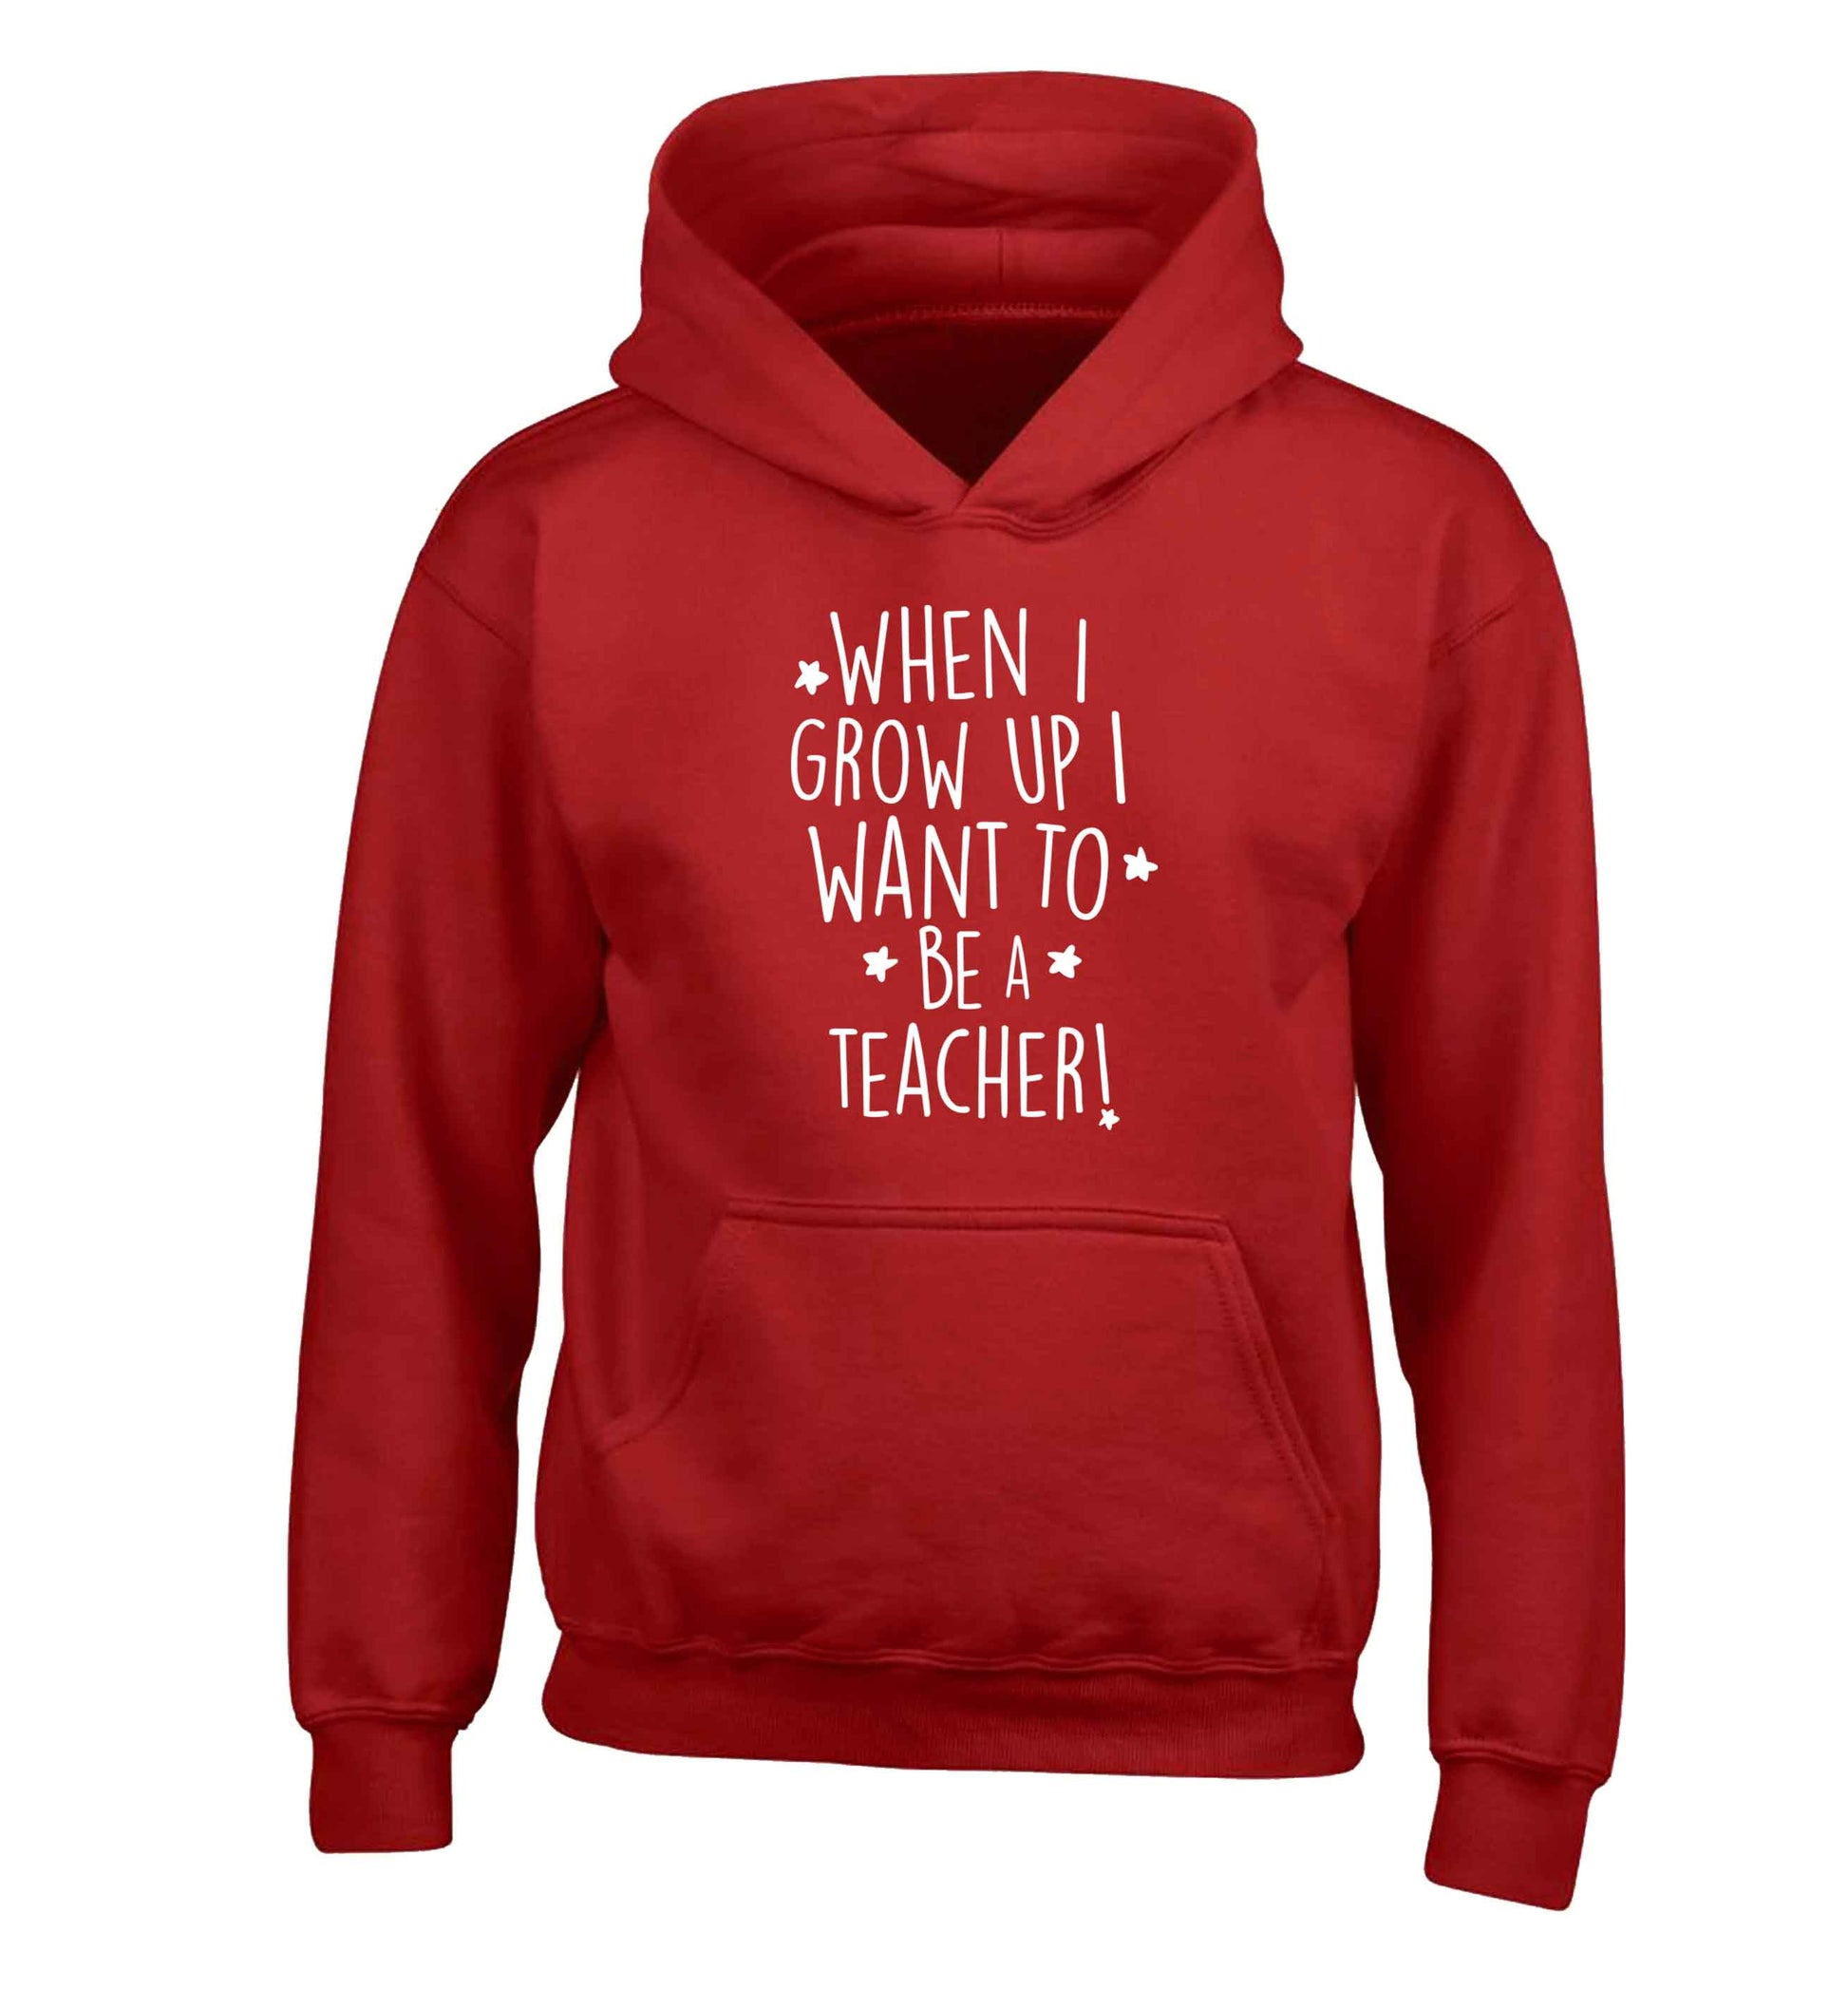 When I grow up I want to be a teacher children's red hoodie 12-13 Years